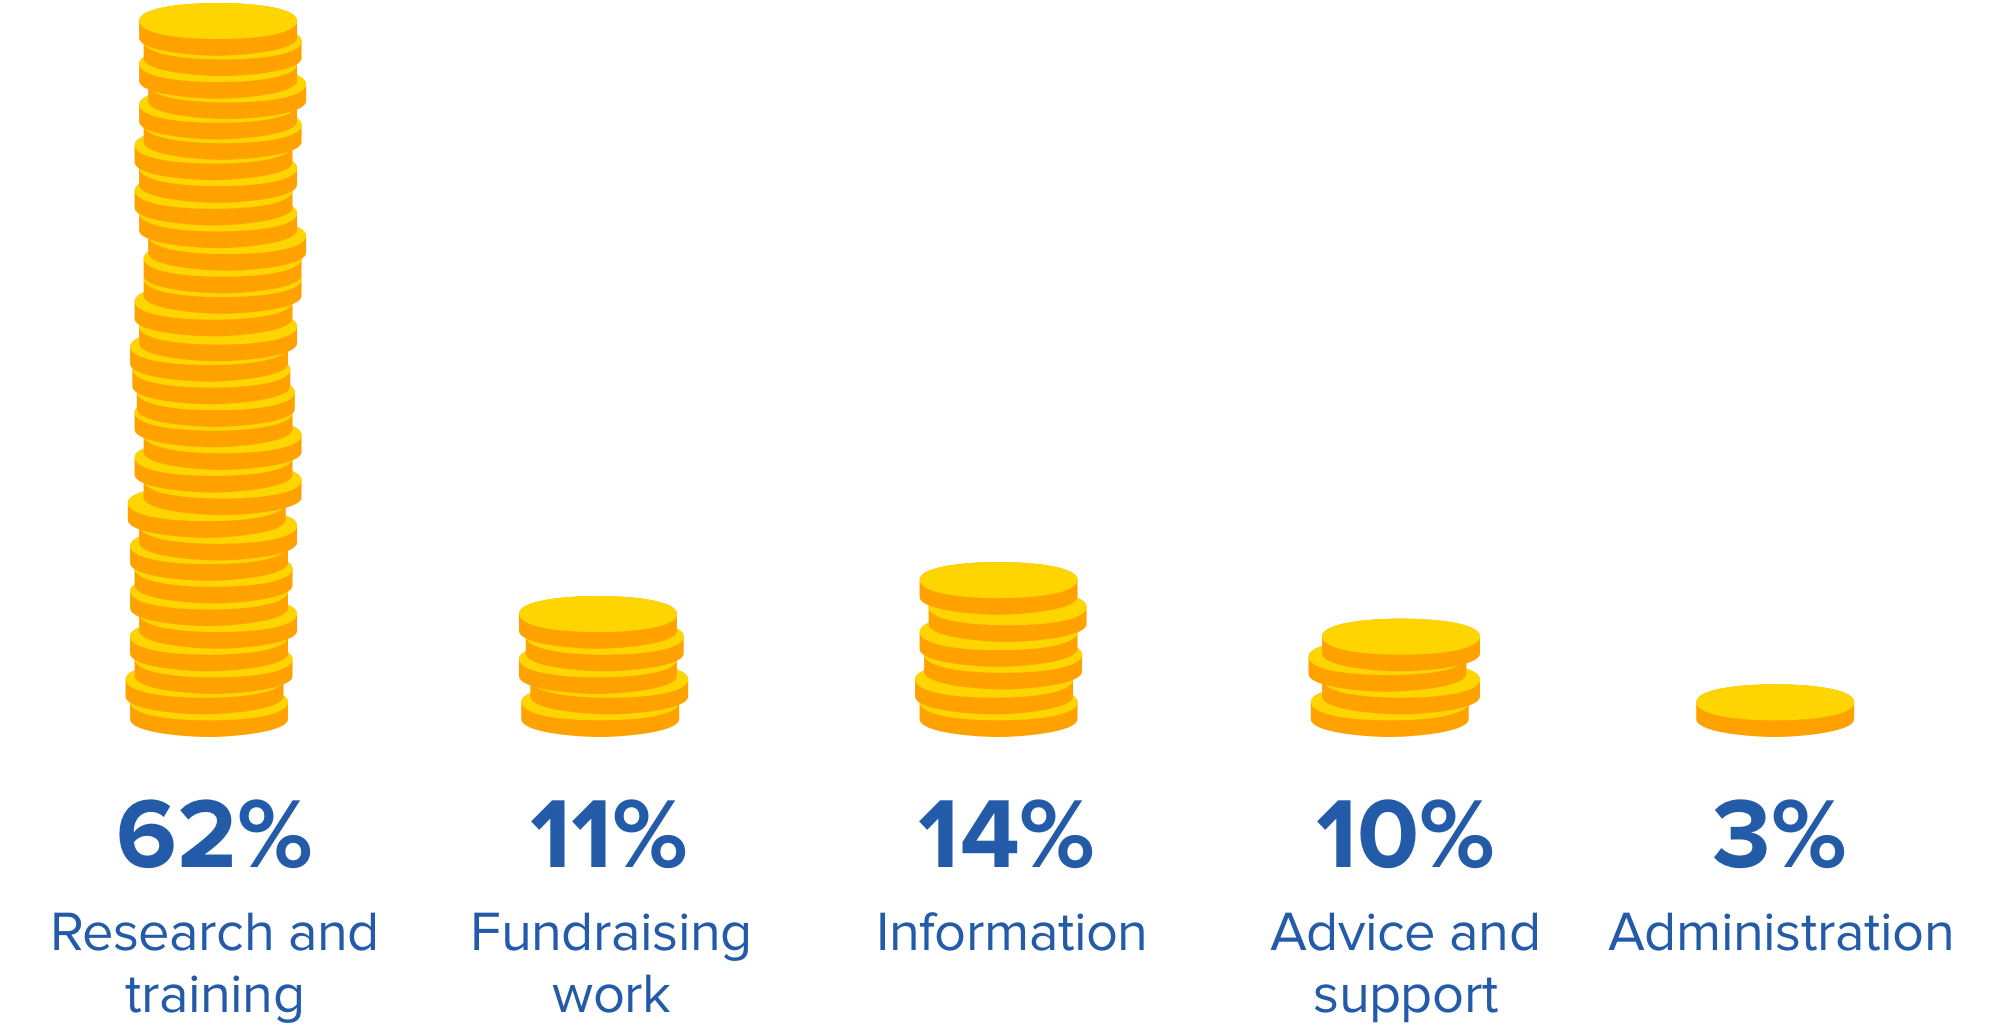 62 per cent is placed in research and training efforts, 11 per cent contributes to fundraising work, 14 per cent to information, 10 per cent to our advice and support program, whilst 3 per cent is allocated to administration.
